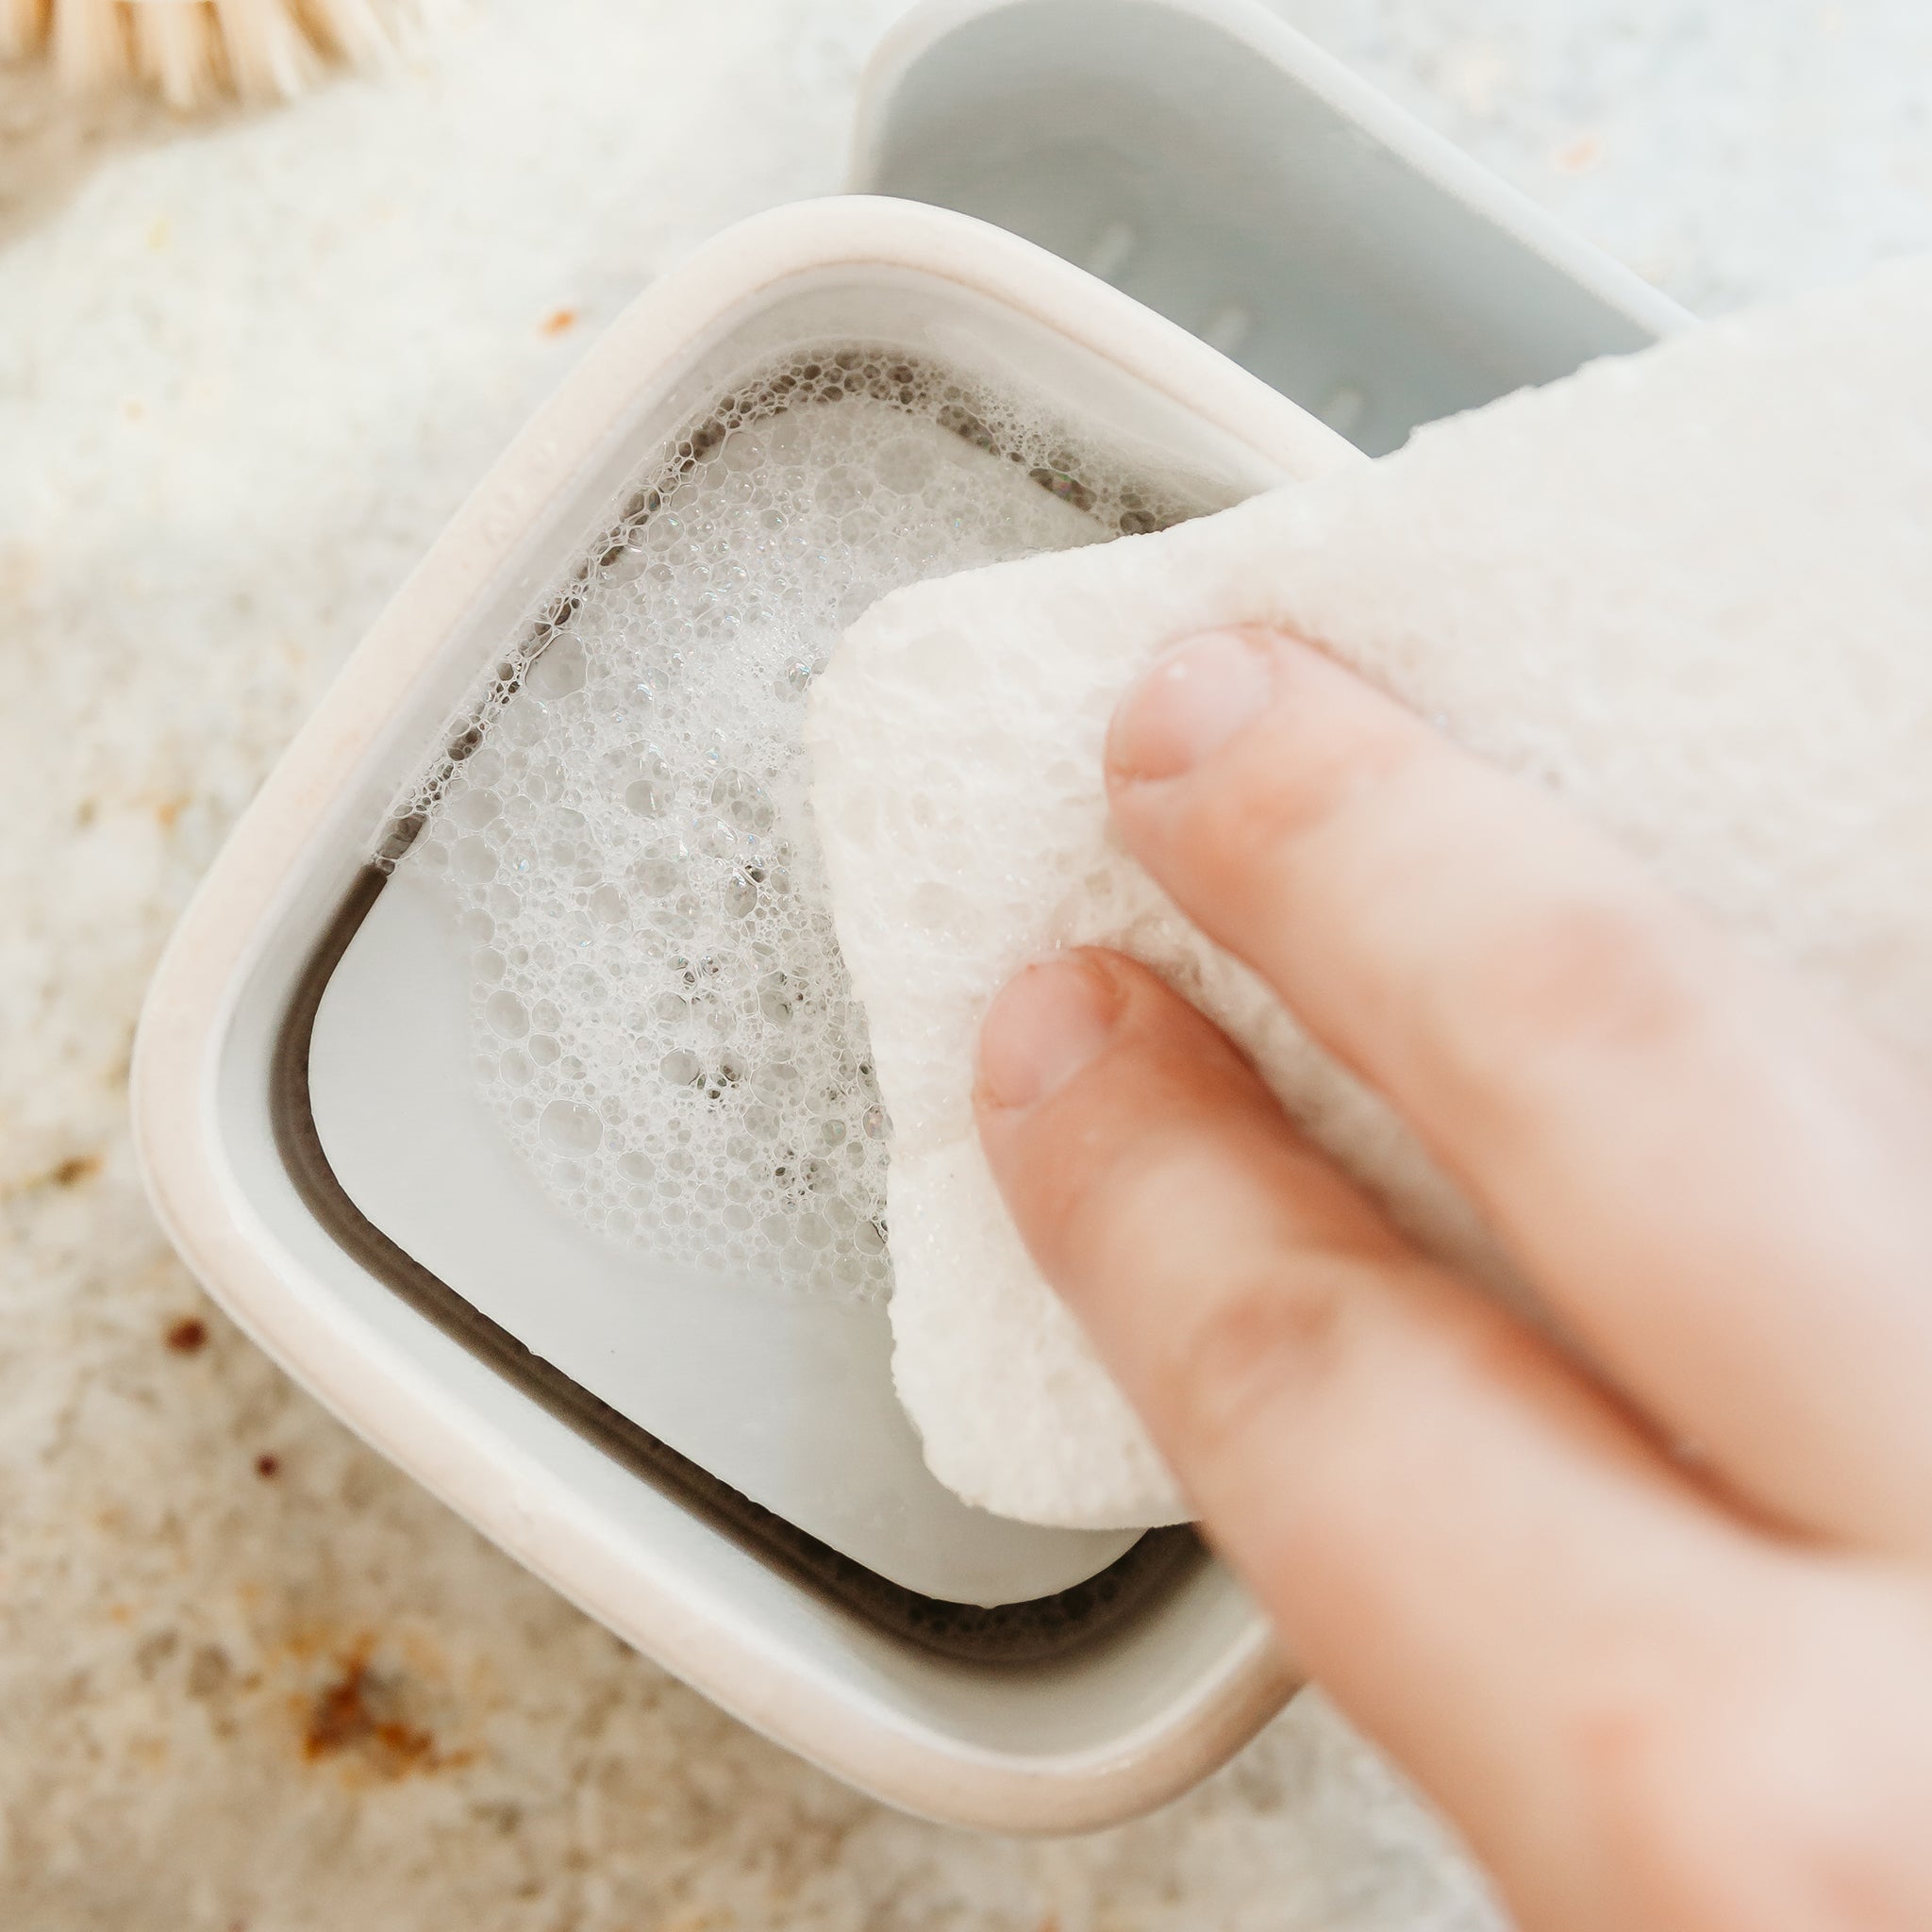 This is your sign to swap out that gross sponge for the Bubble Up Dish